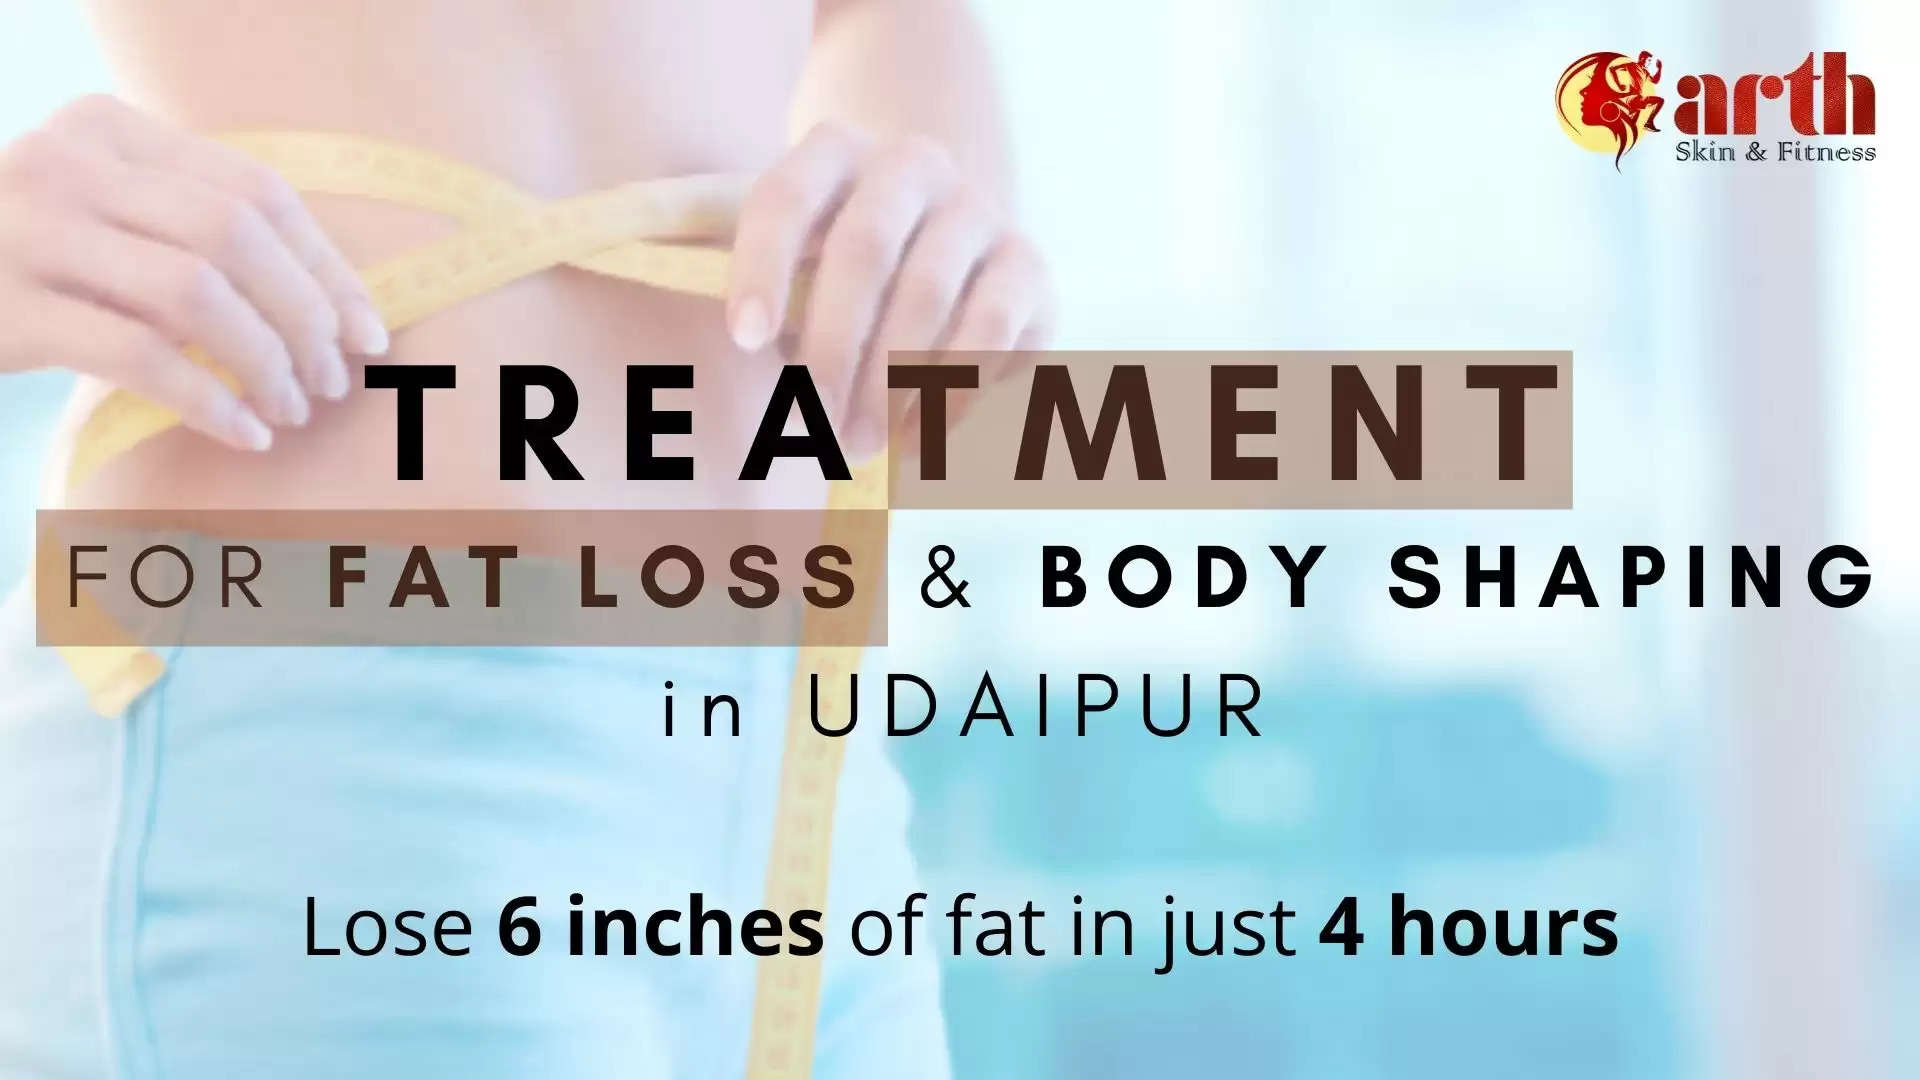 Losing 6 inches of fat in just 4 hours Fat Loss Clinic in Udaipur Arth Fat Loss Clinic Body Shaping and Fat Loss in Udaipur